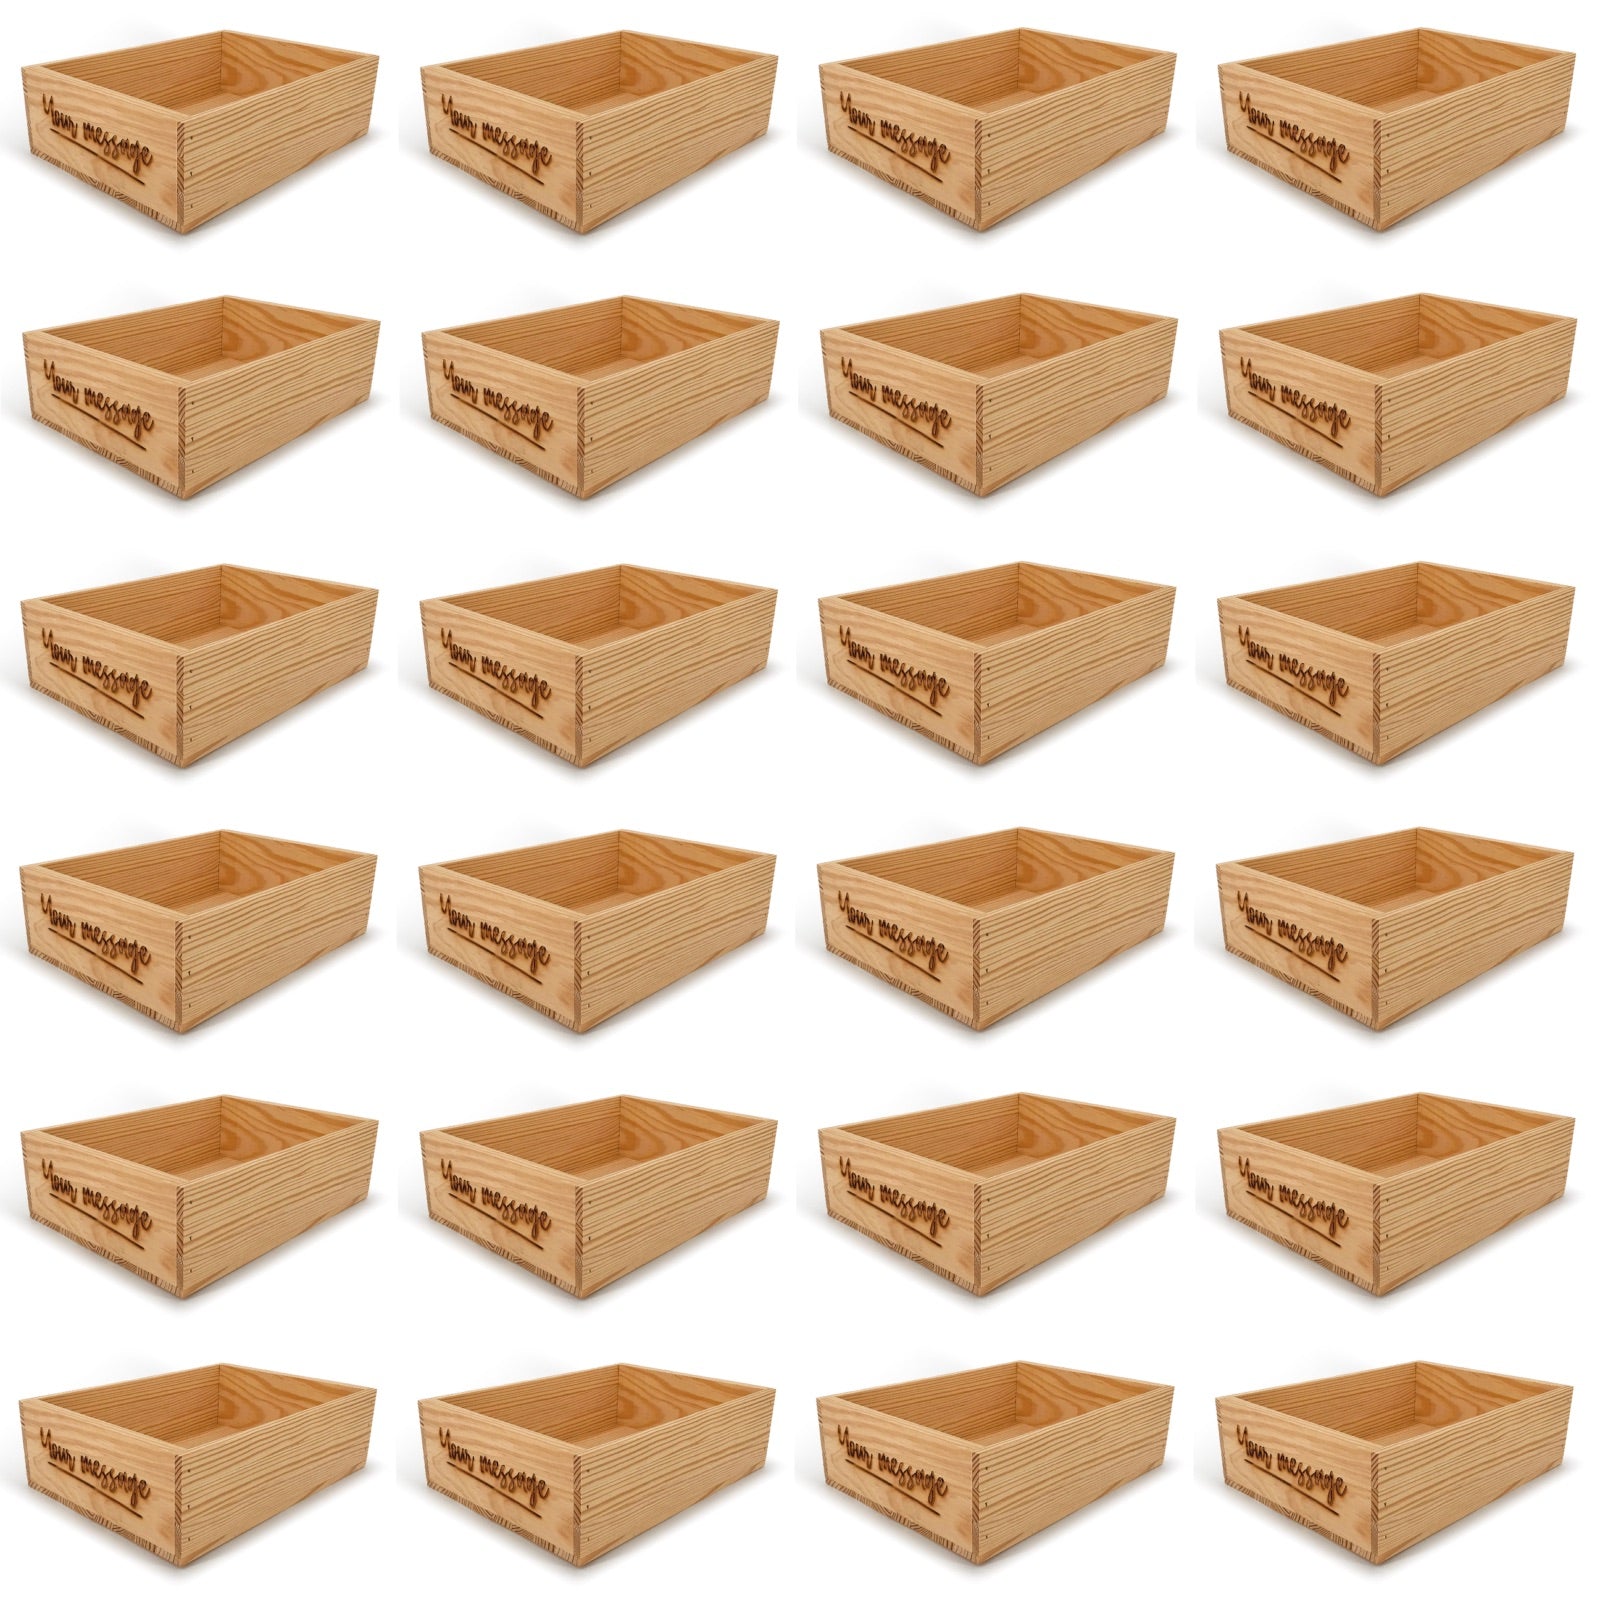 24 Small wooden crates with custom message 14x10x4.25